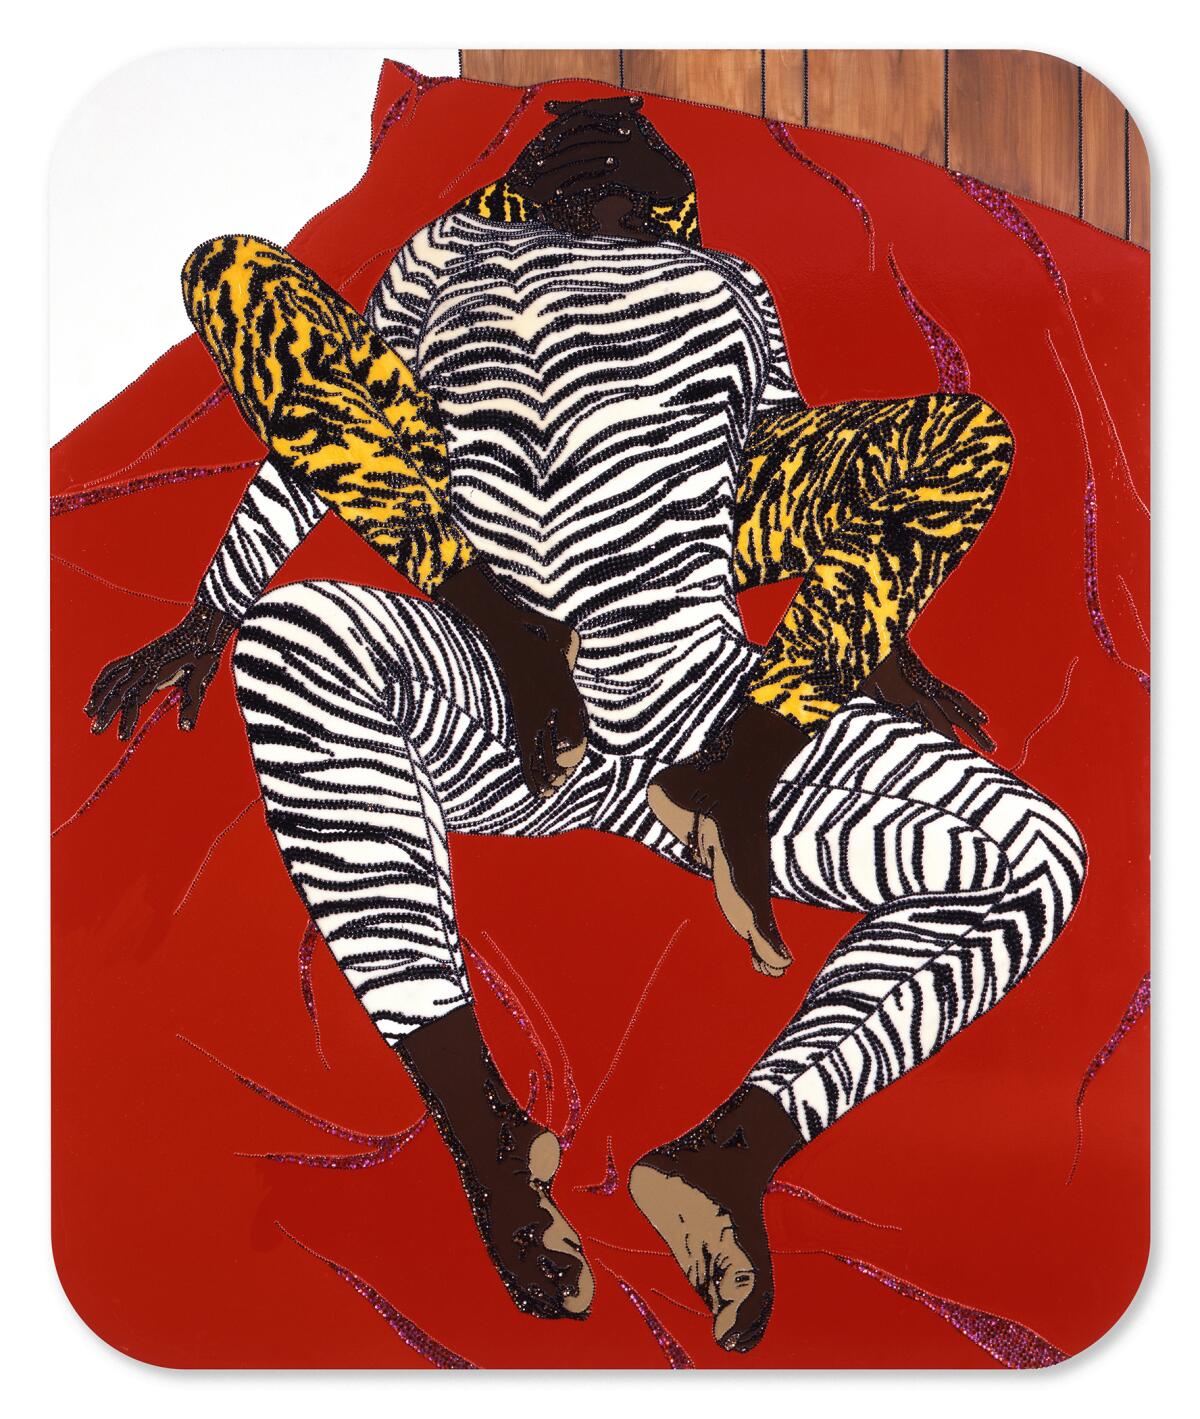 A 2006 painting by Mickalene Thomas appears to show a human figure in zebra-print bosy suit lying atop another person.